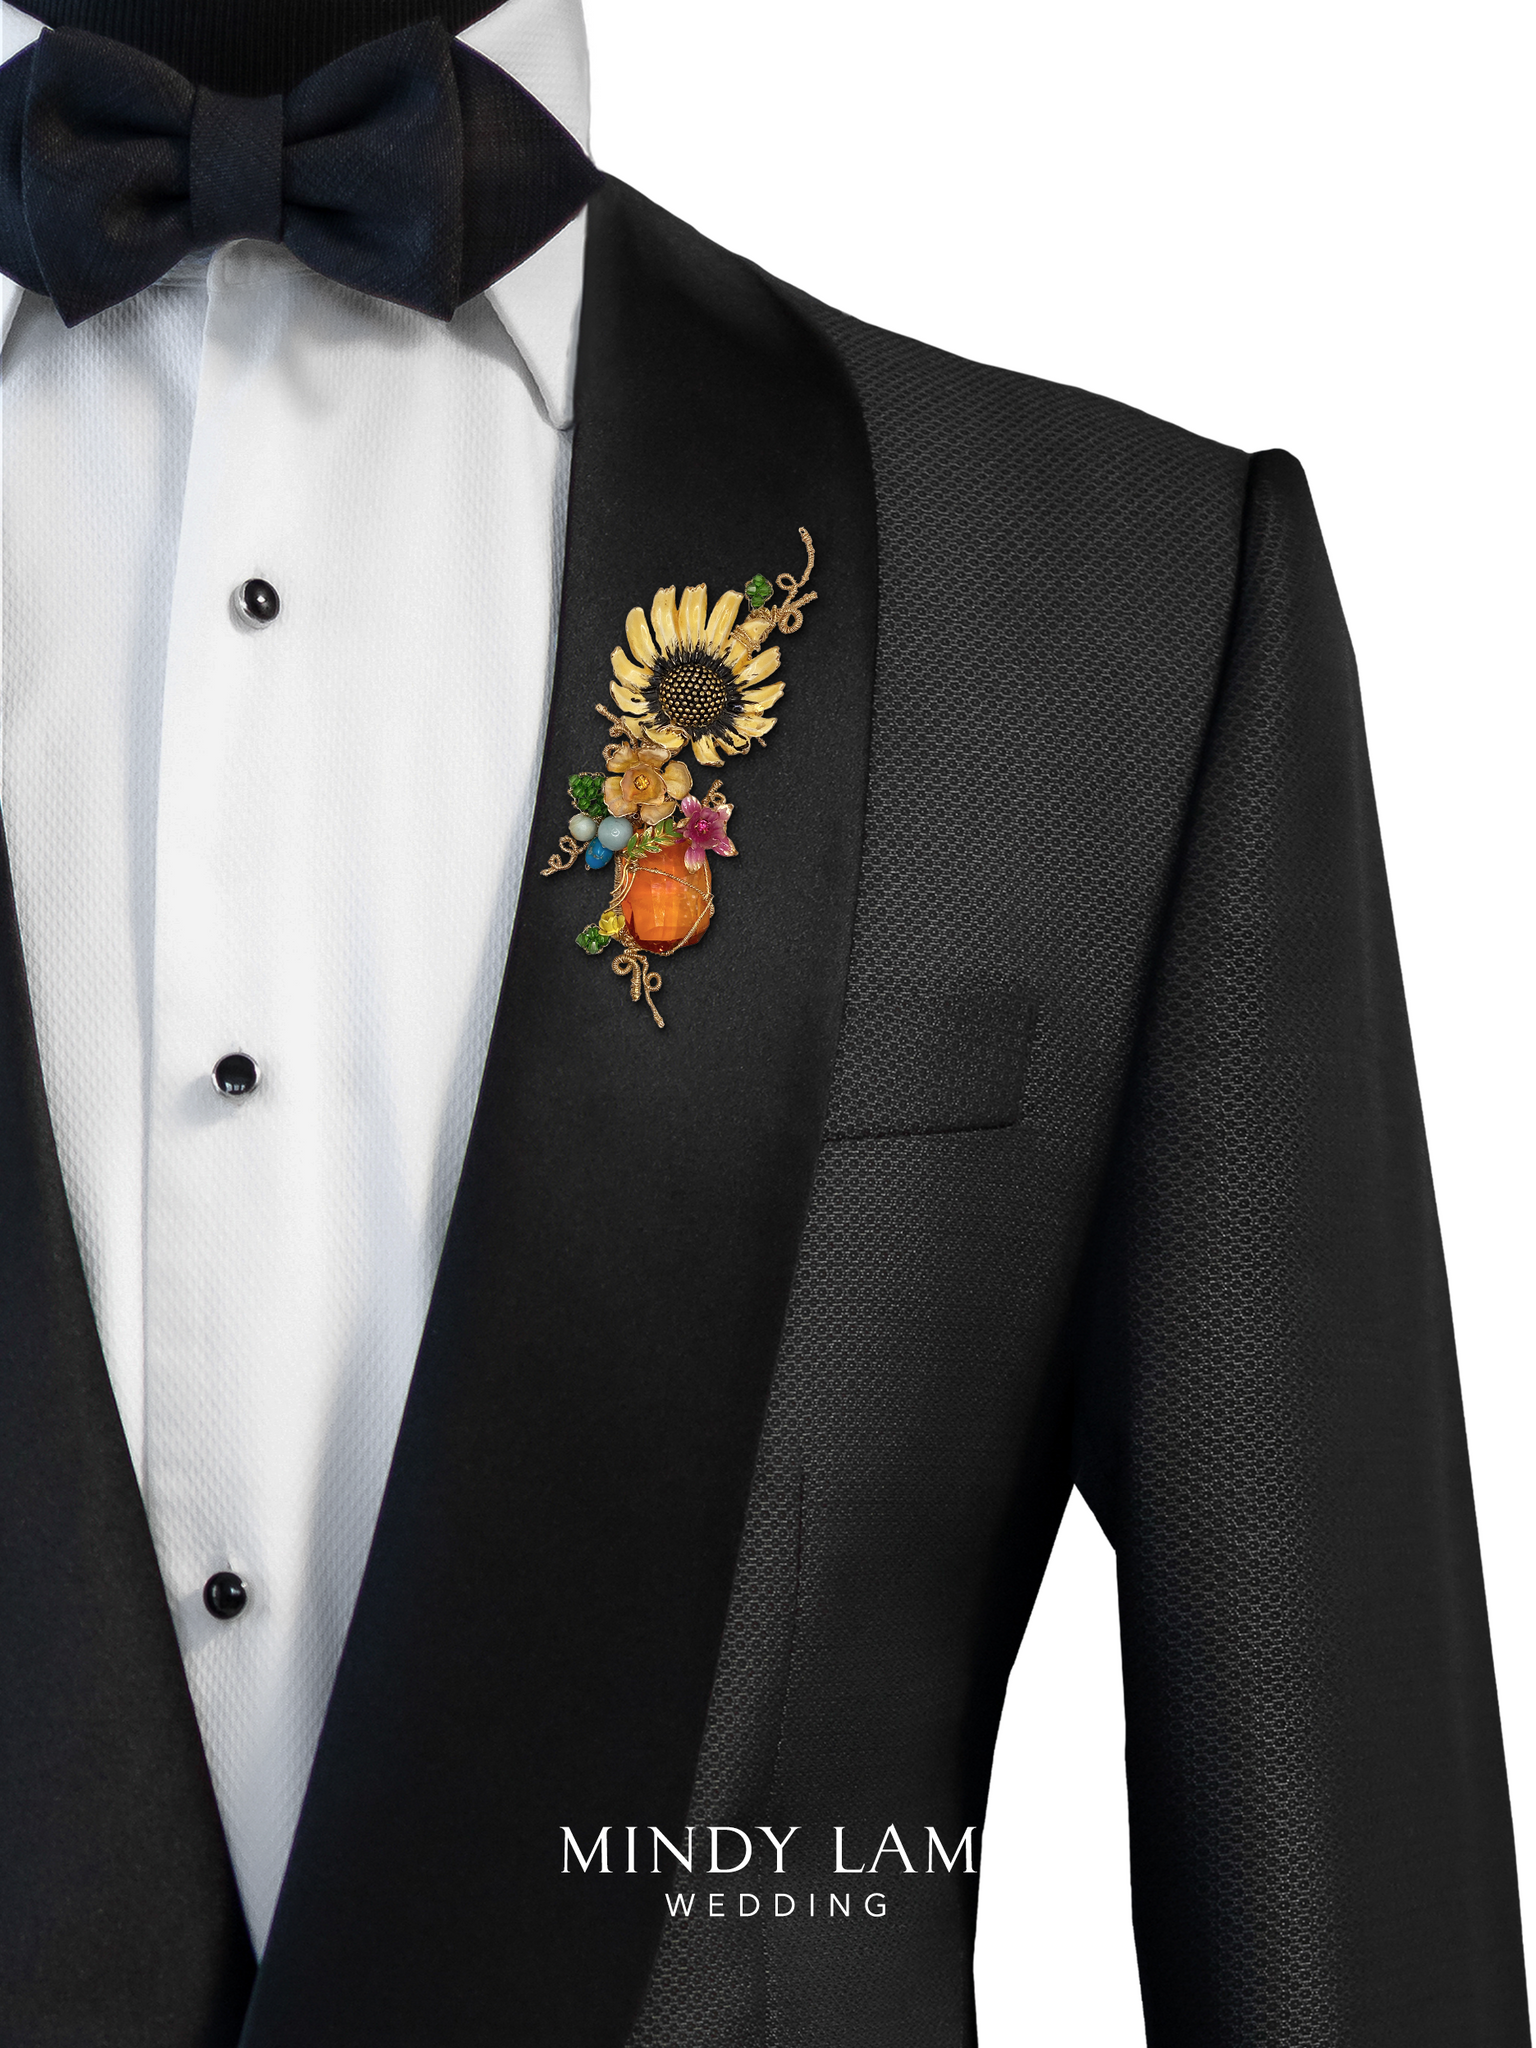 Men's Lapel Pin - Warmth of the Sun-Kissed Blooms